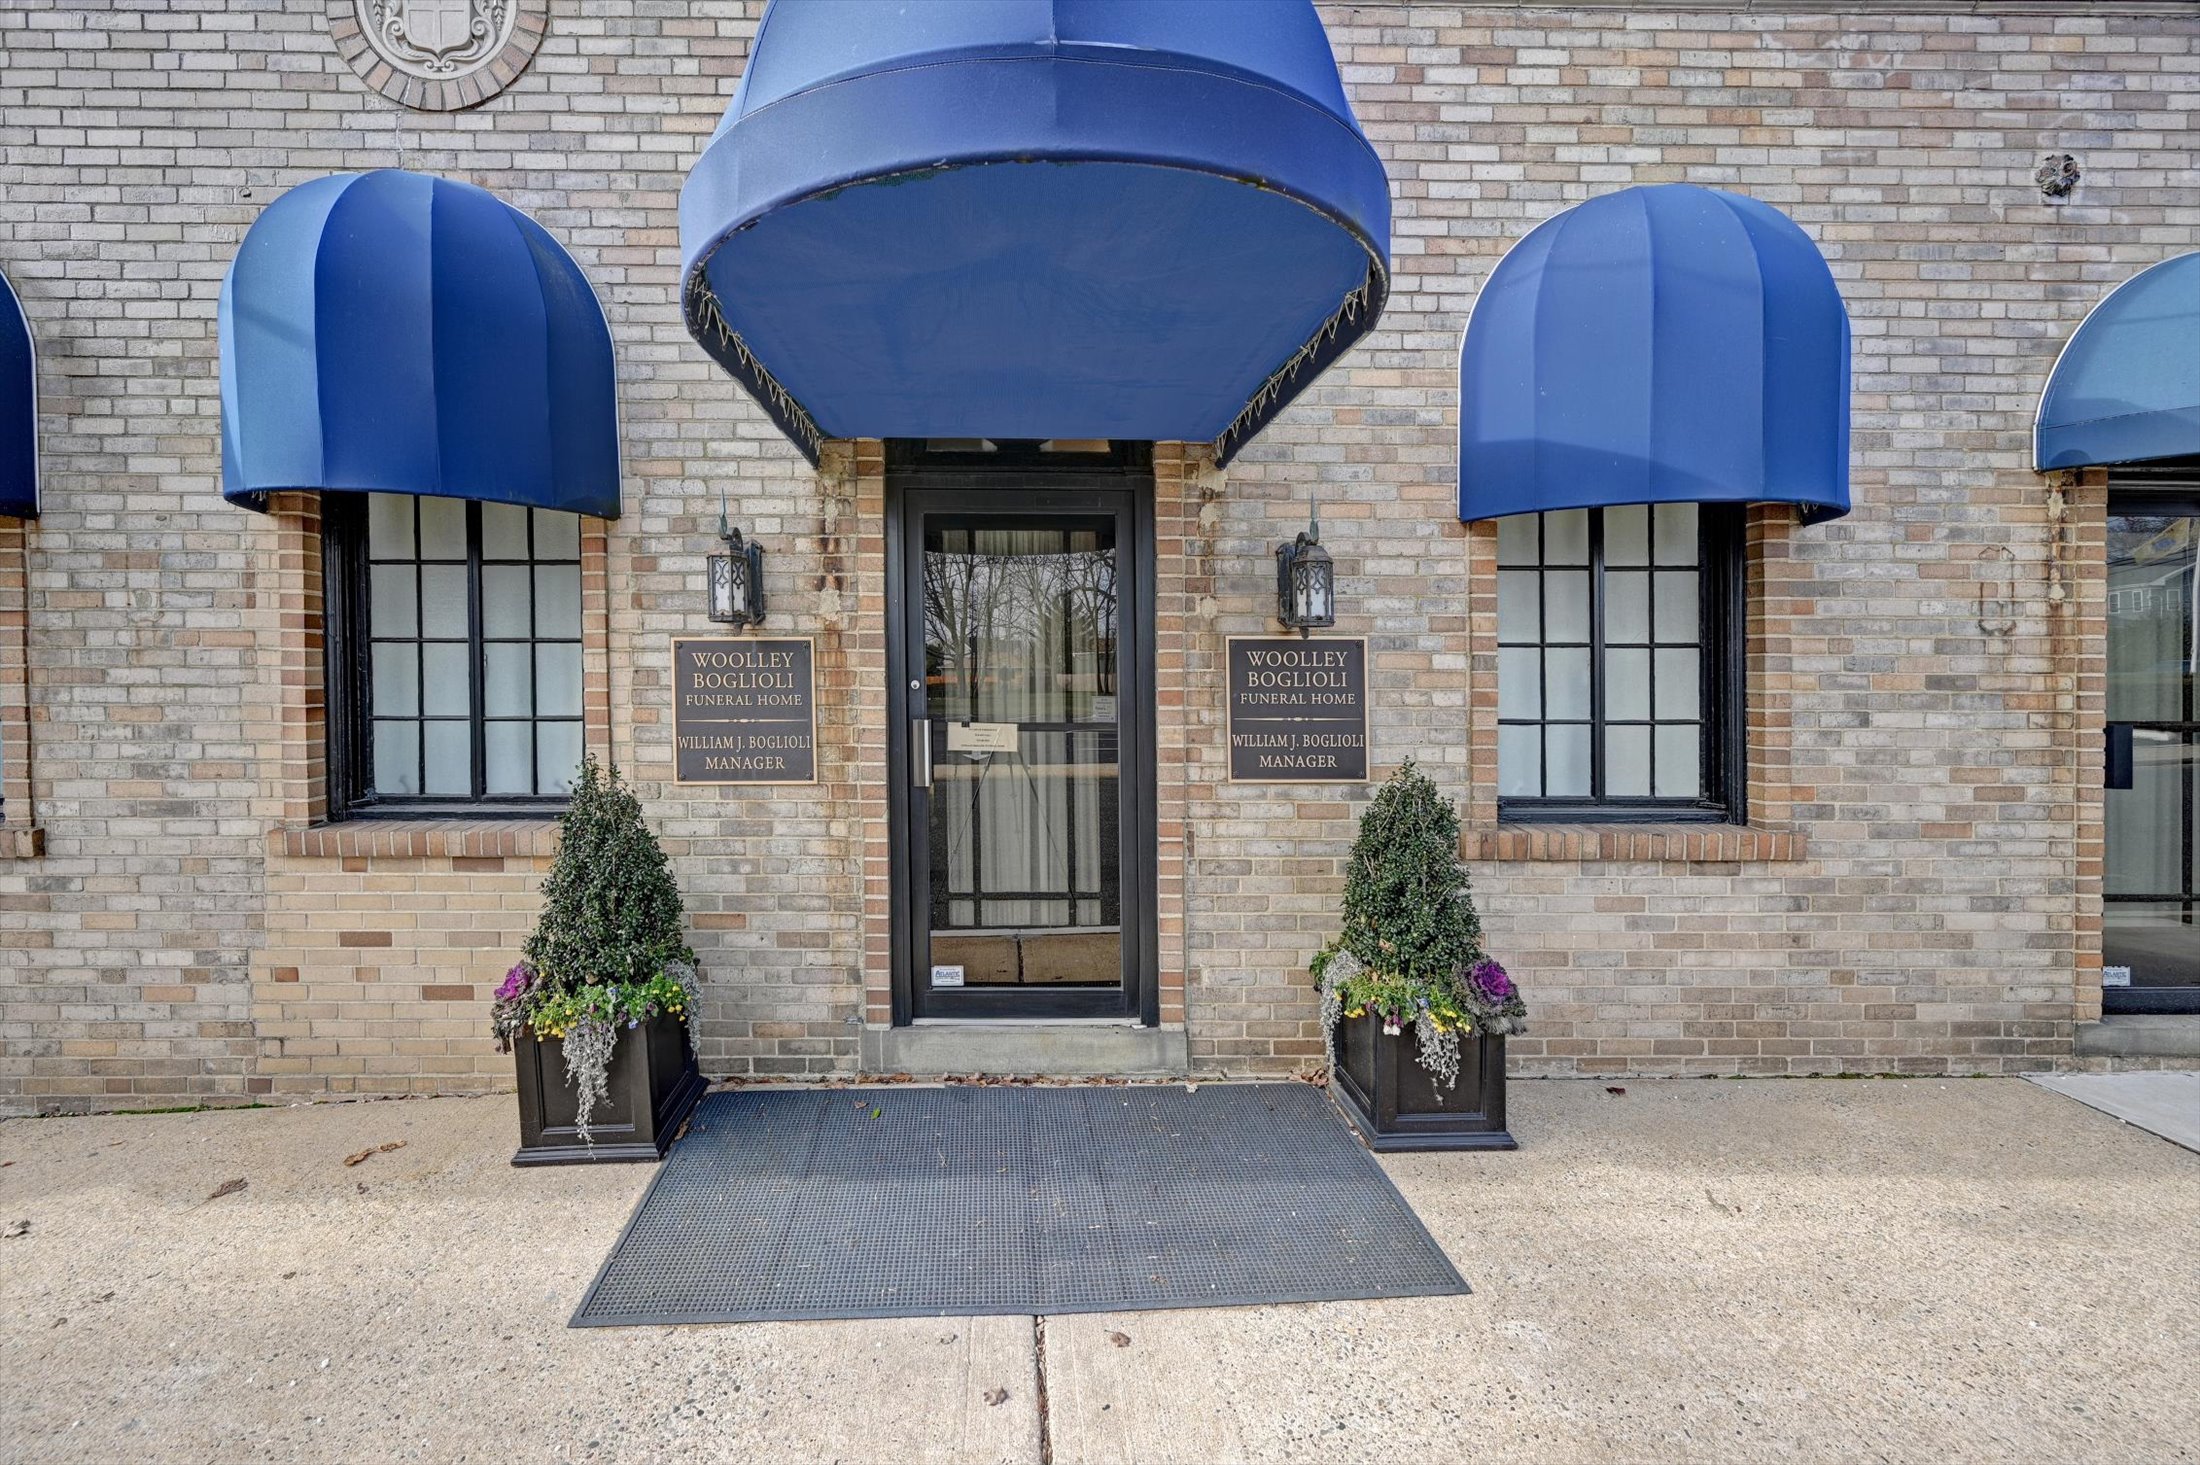 Exterior of 
Woolley-Boglioli Funeral Home
10 Morrell St
Long Branch, NJ 07740